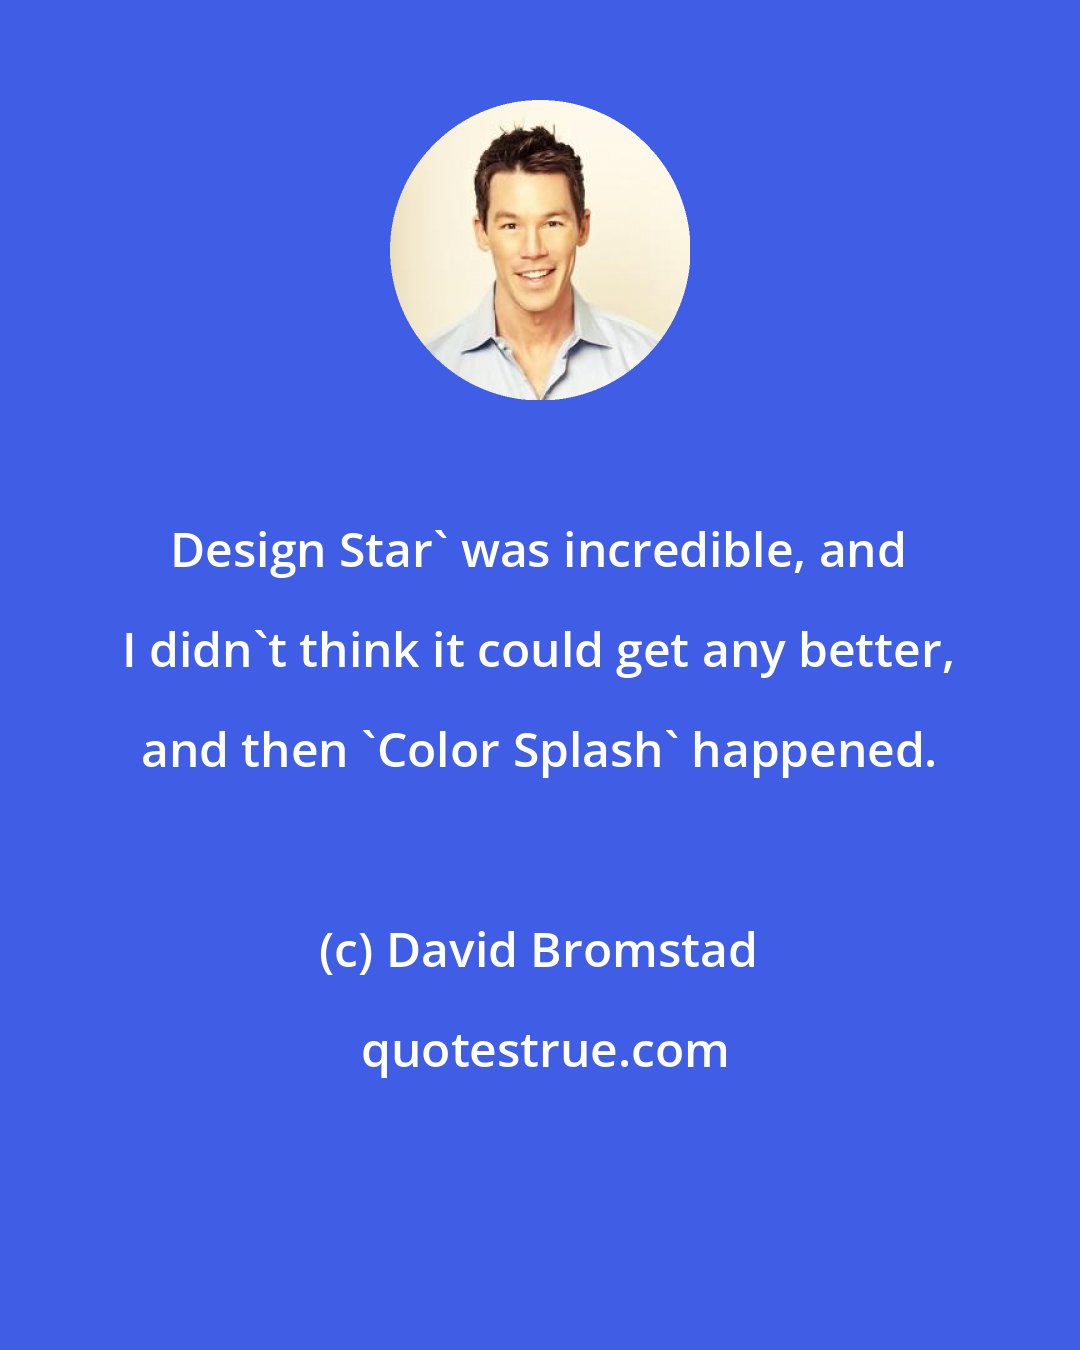 David Bromstad: Design Star' was incredible, and I didn't think it could get any better, and then 'Color Splash' happened.